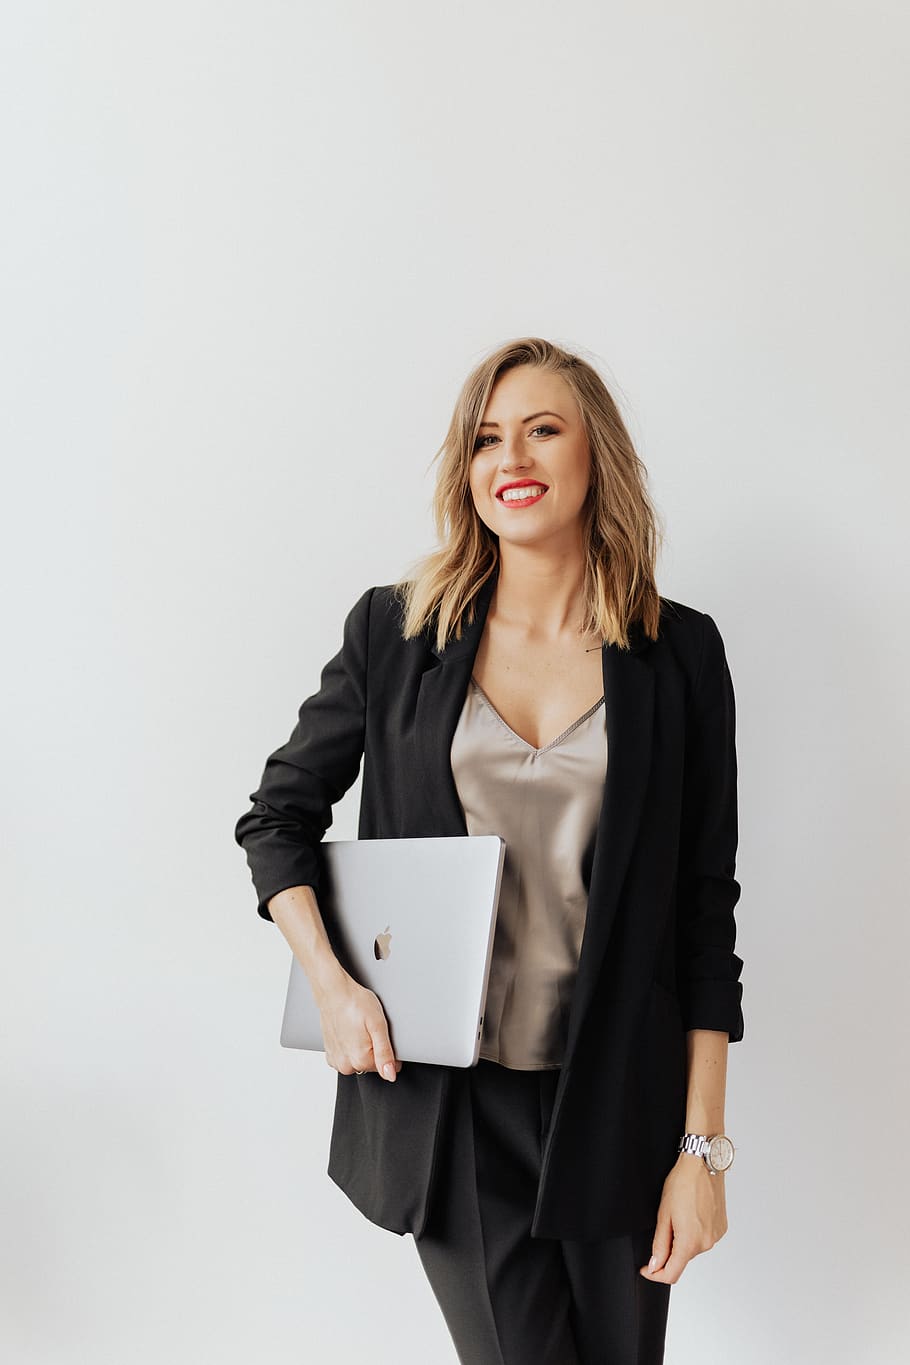 business woman, business, woman, laptop, computer, standing, blond, blonde, smile, attractive